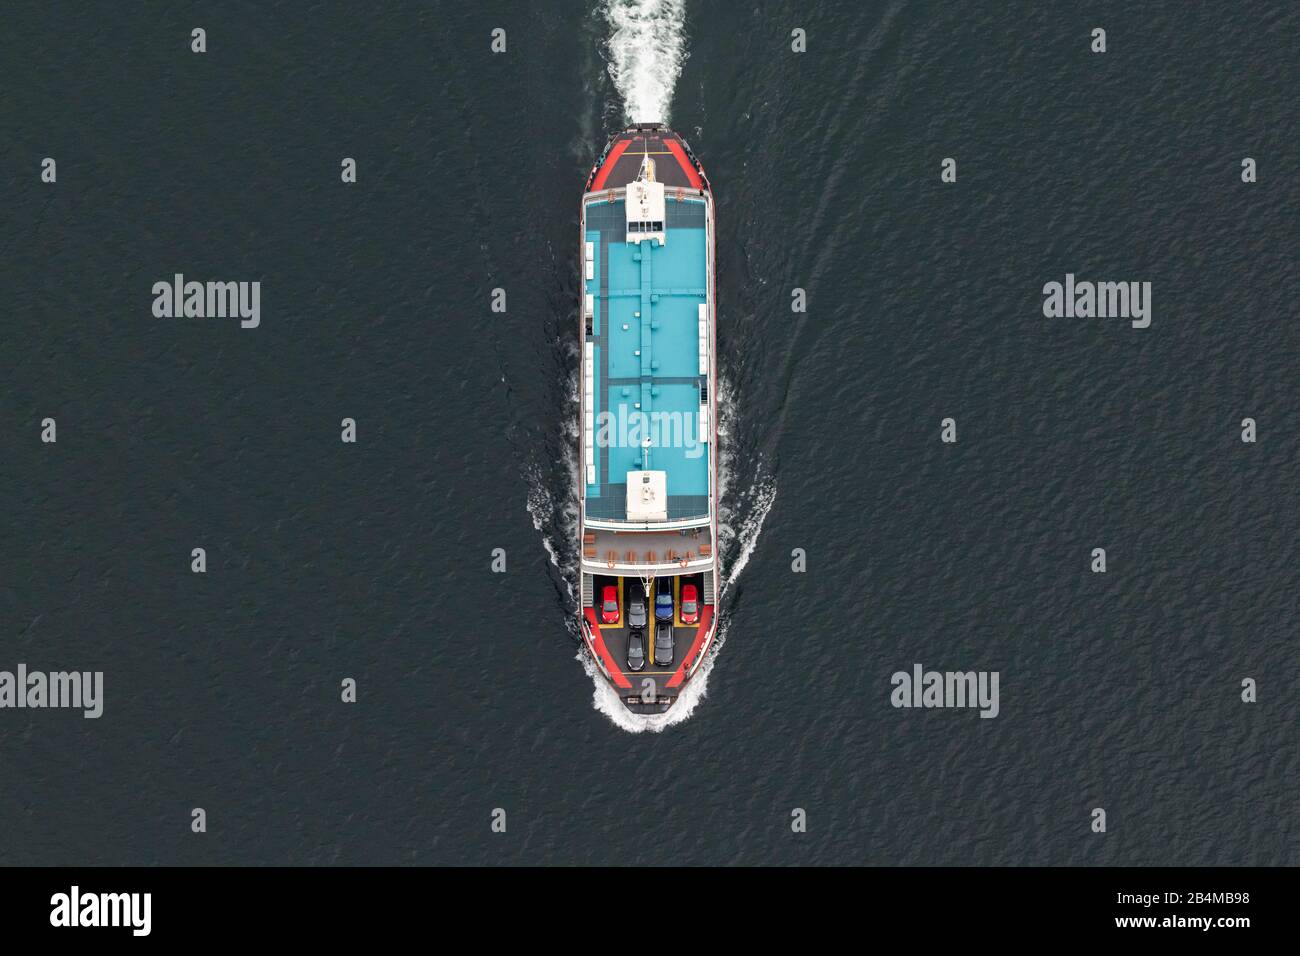 Germany, Baden-Wuerttemberg, Lake Constance, car ferry Meersburg Konstanz from above Stock Photo